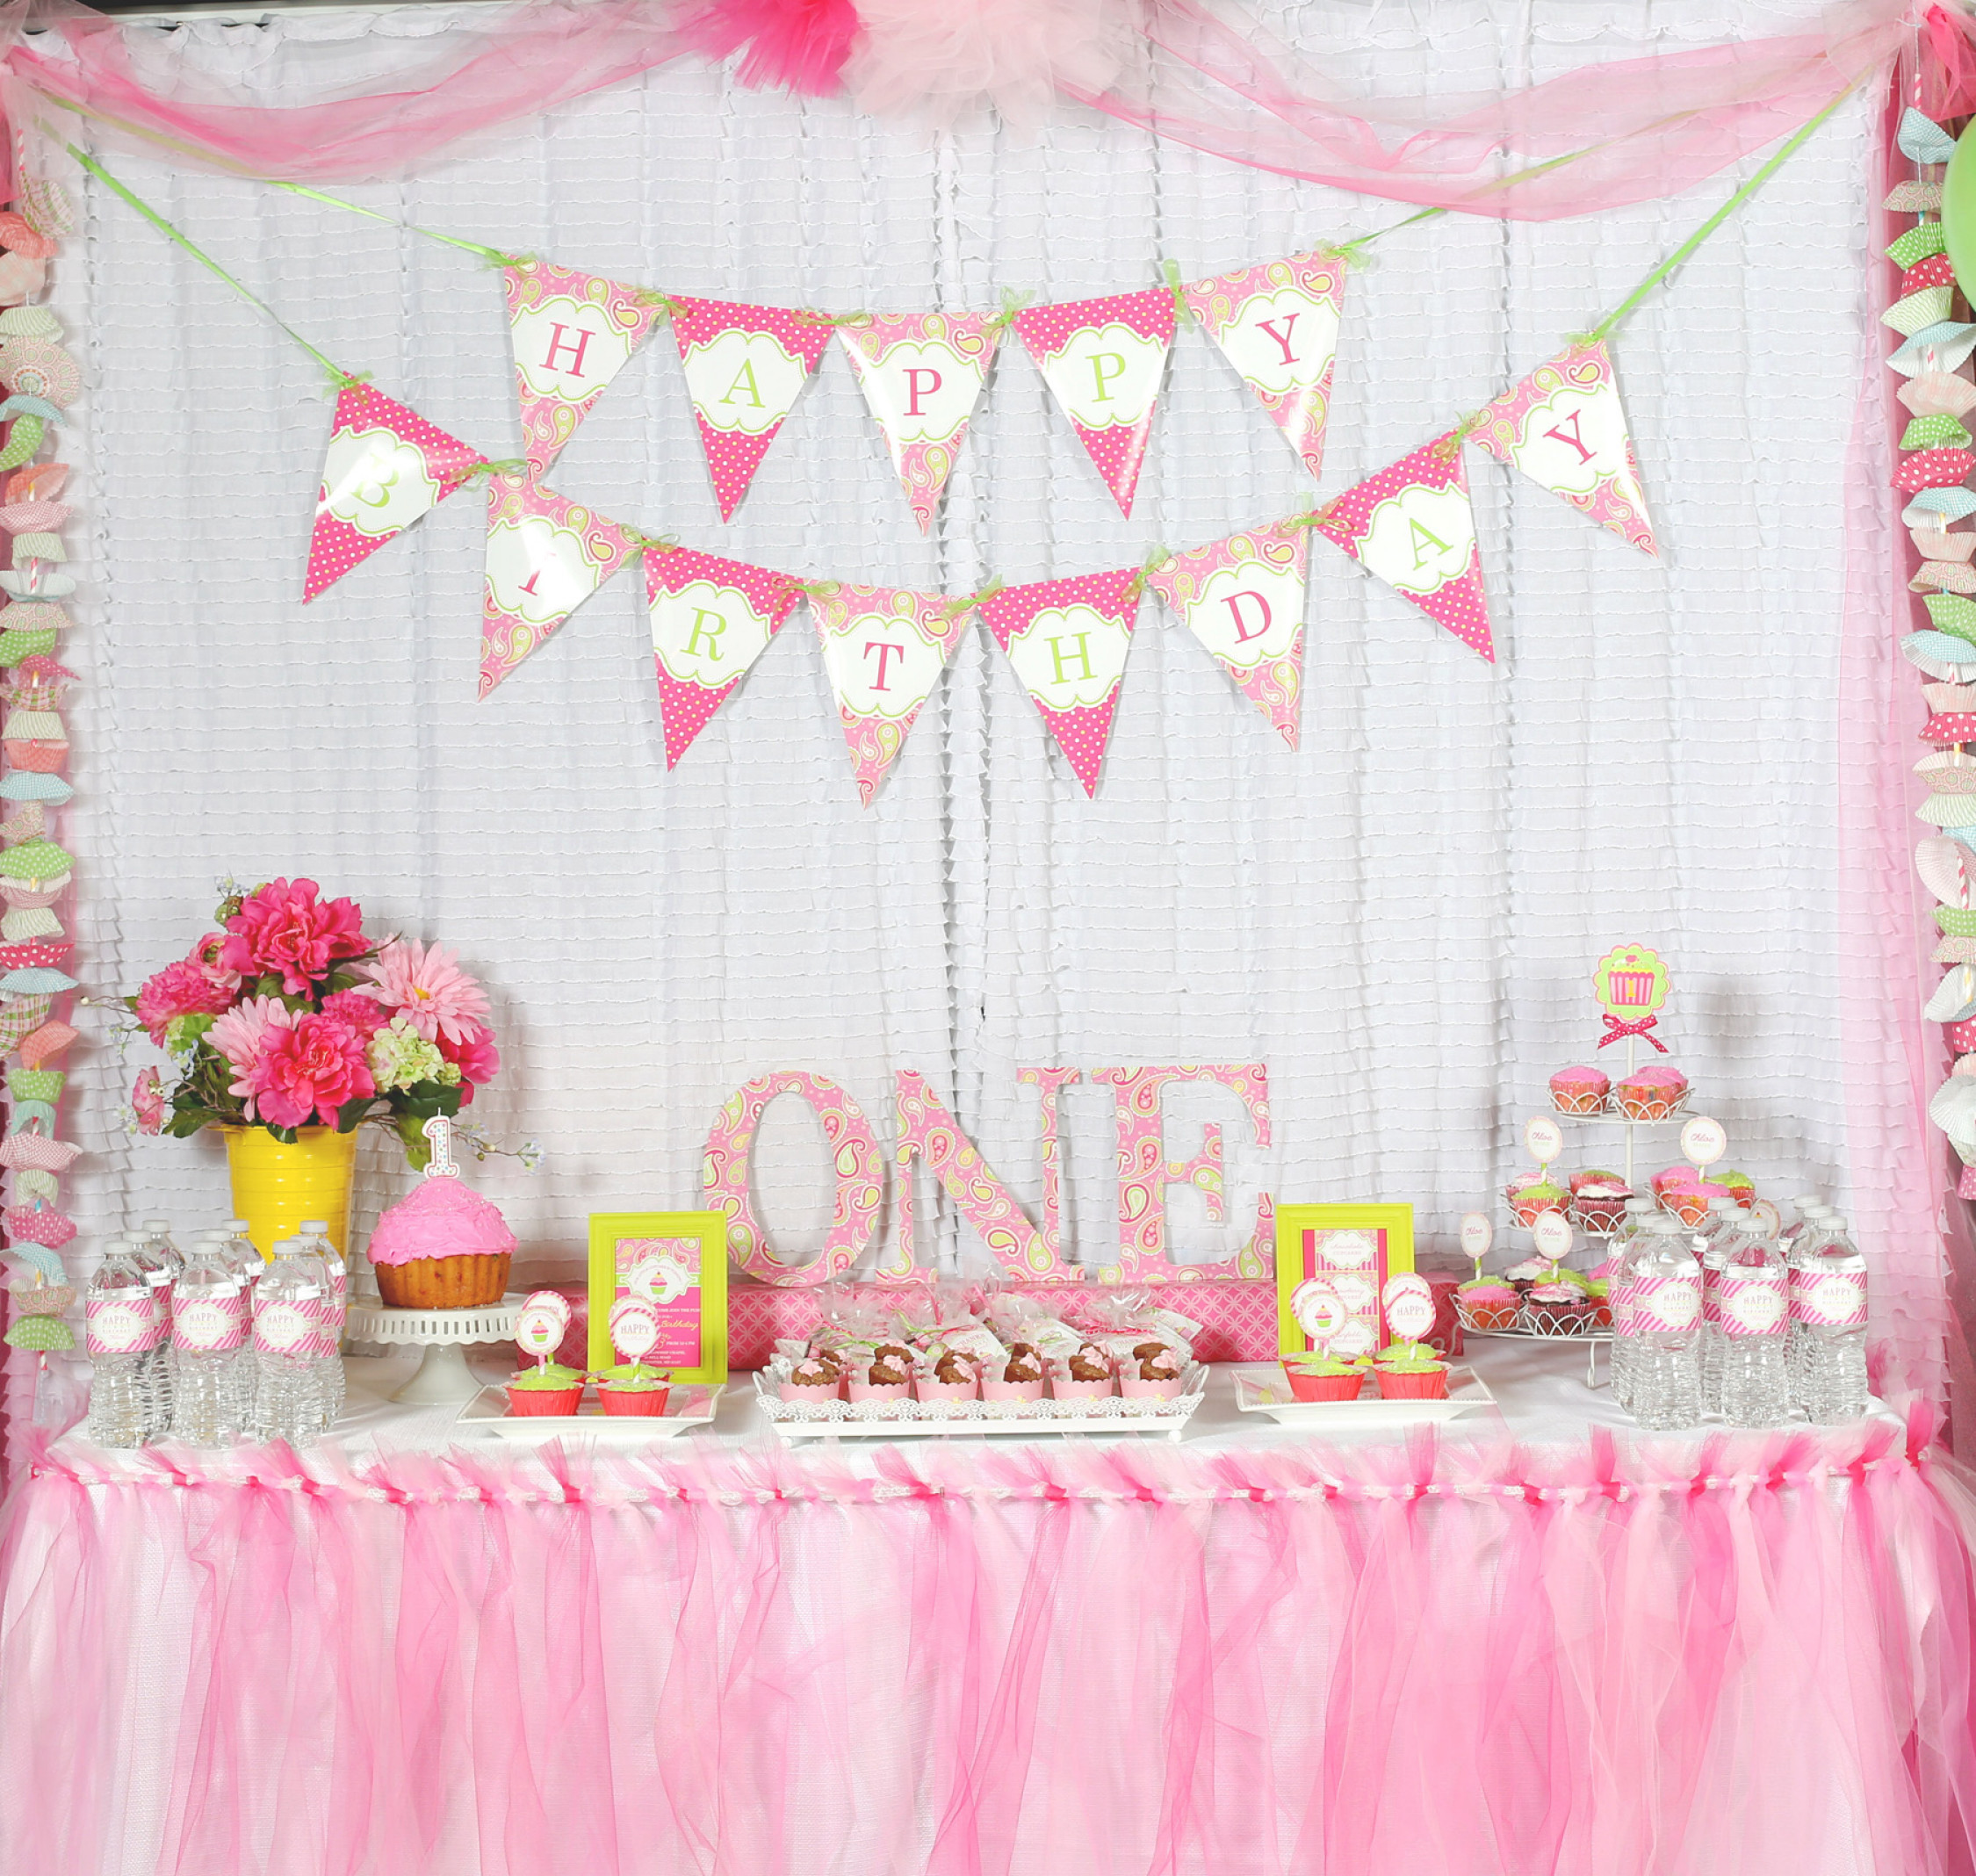 Girls Birthday Party Ideas
 A Cupcake Themed 1st Birthday party with Paisley and Polka